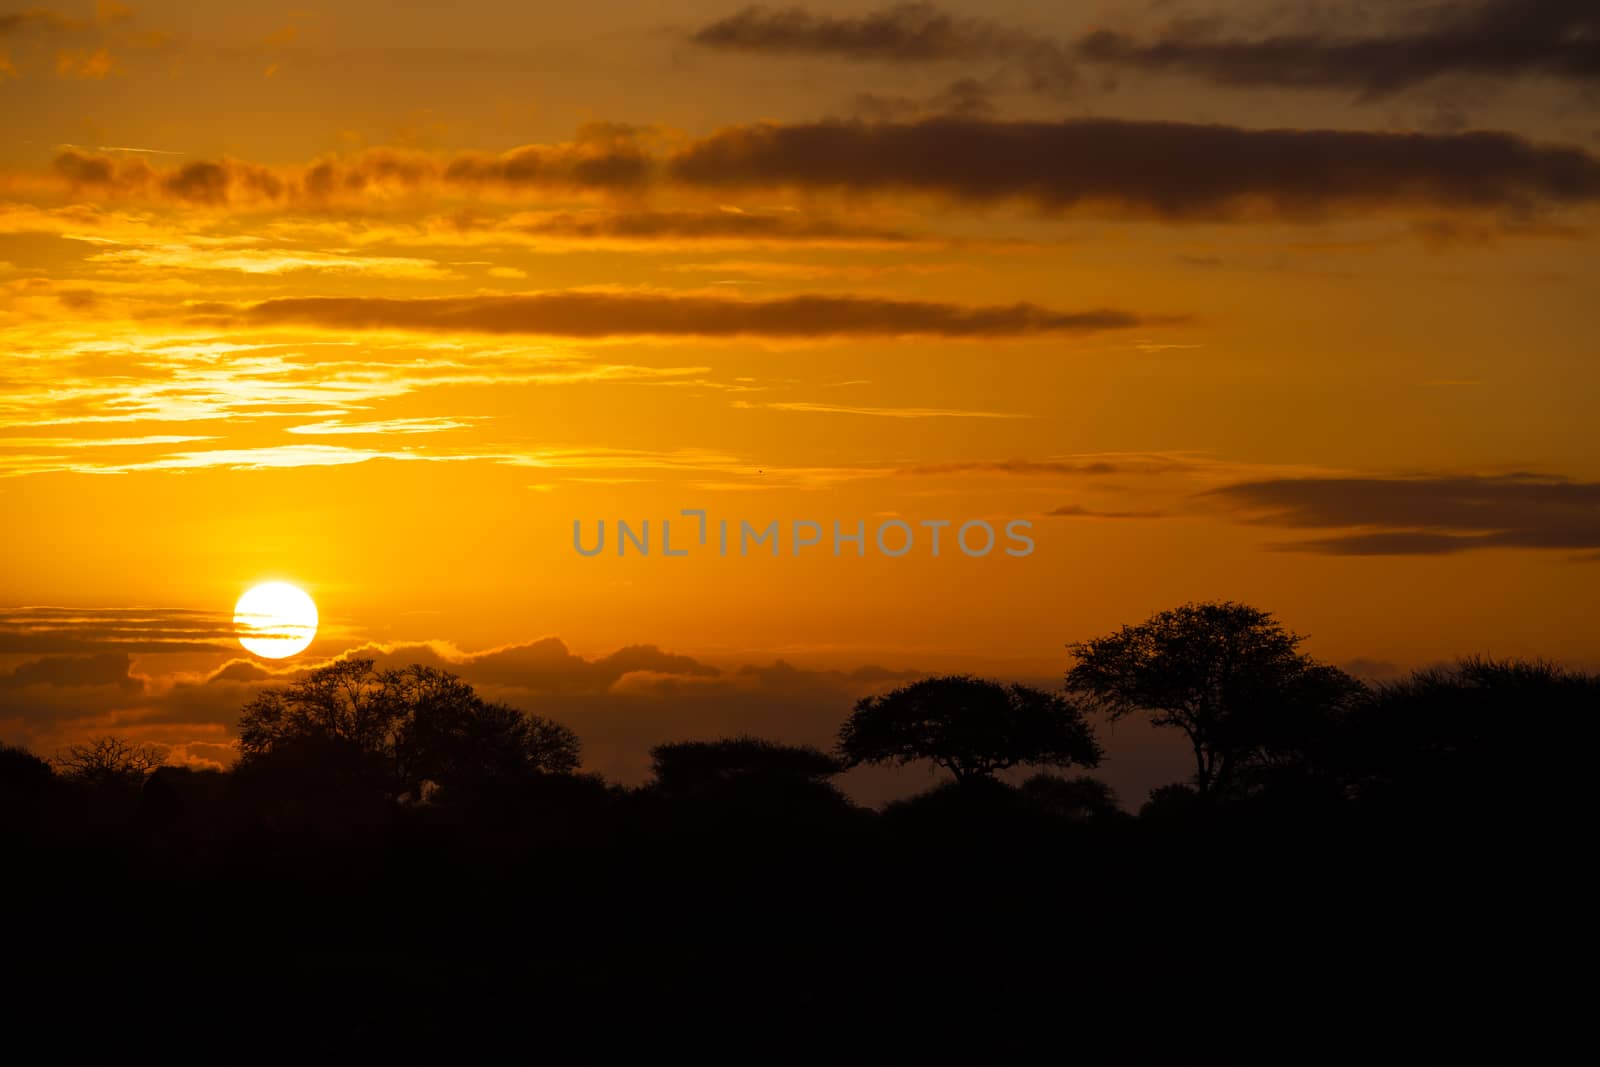 A typical african sunset with trees silhouettes and clouds